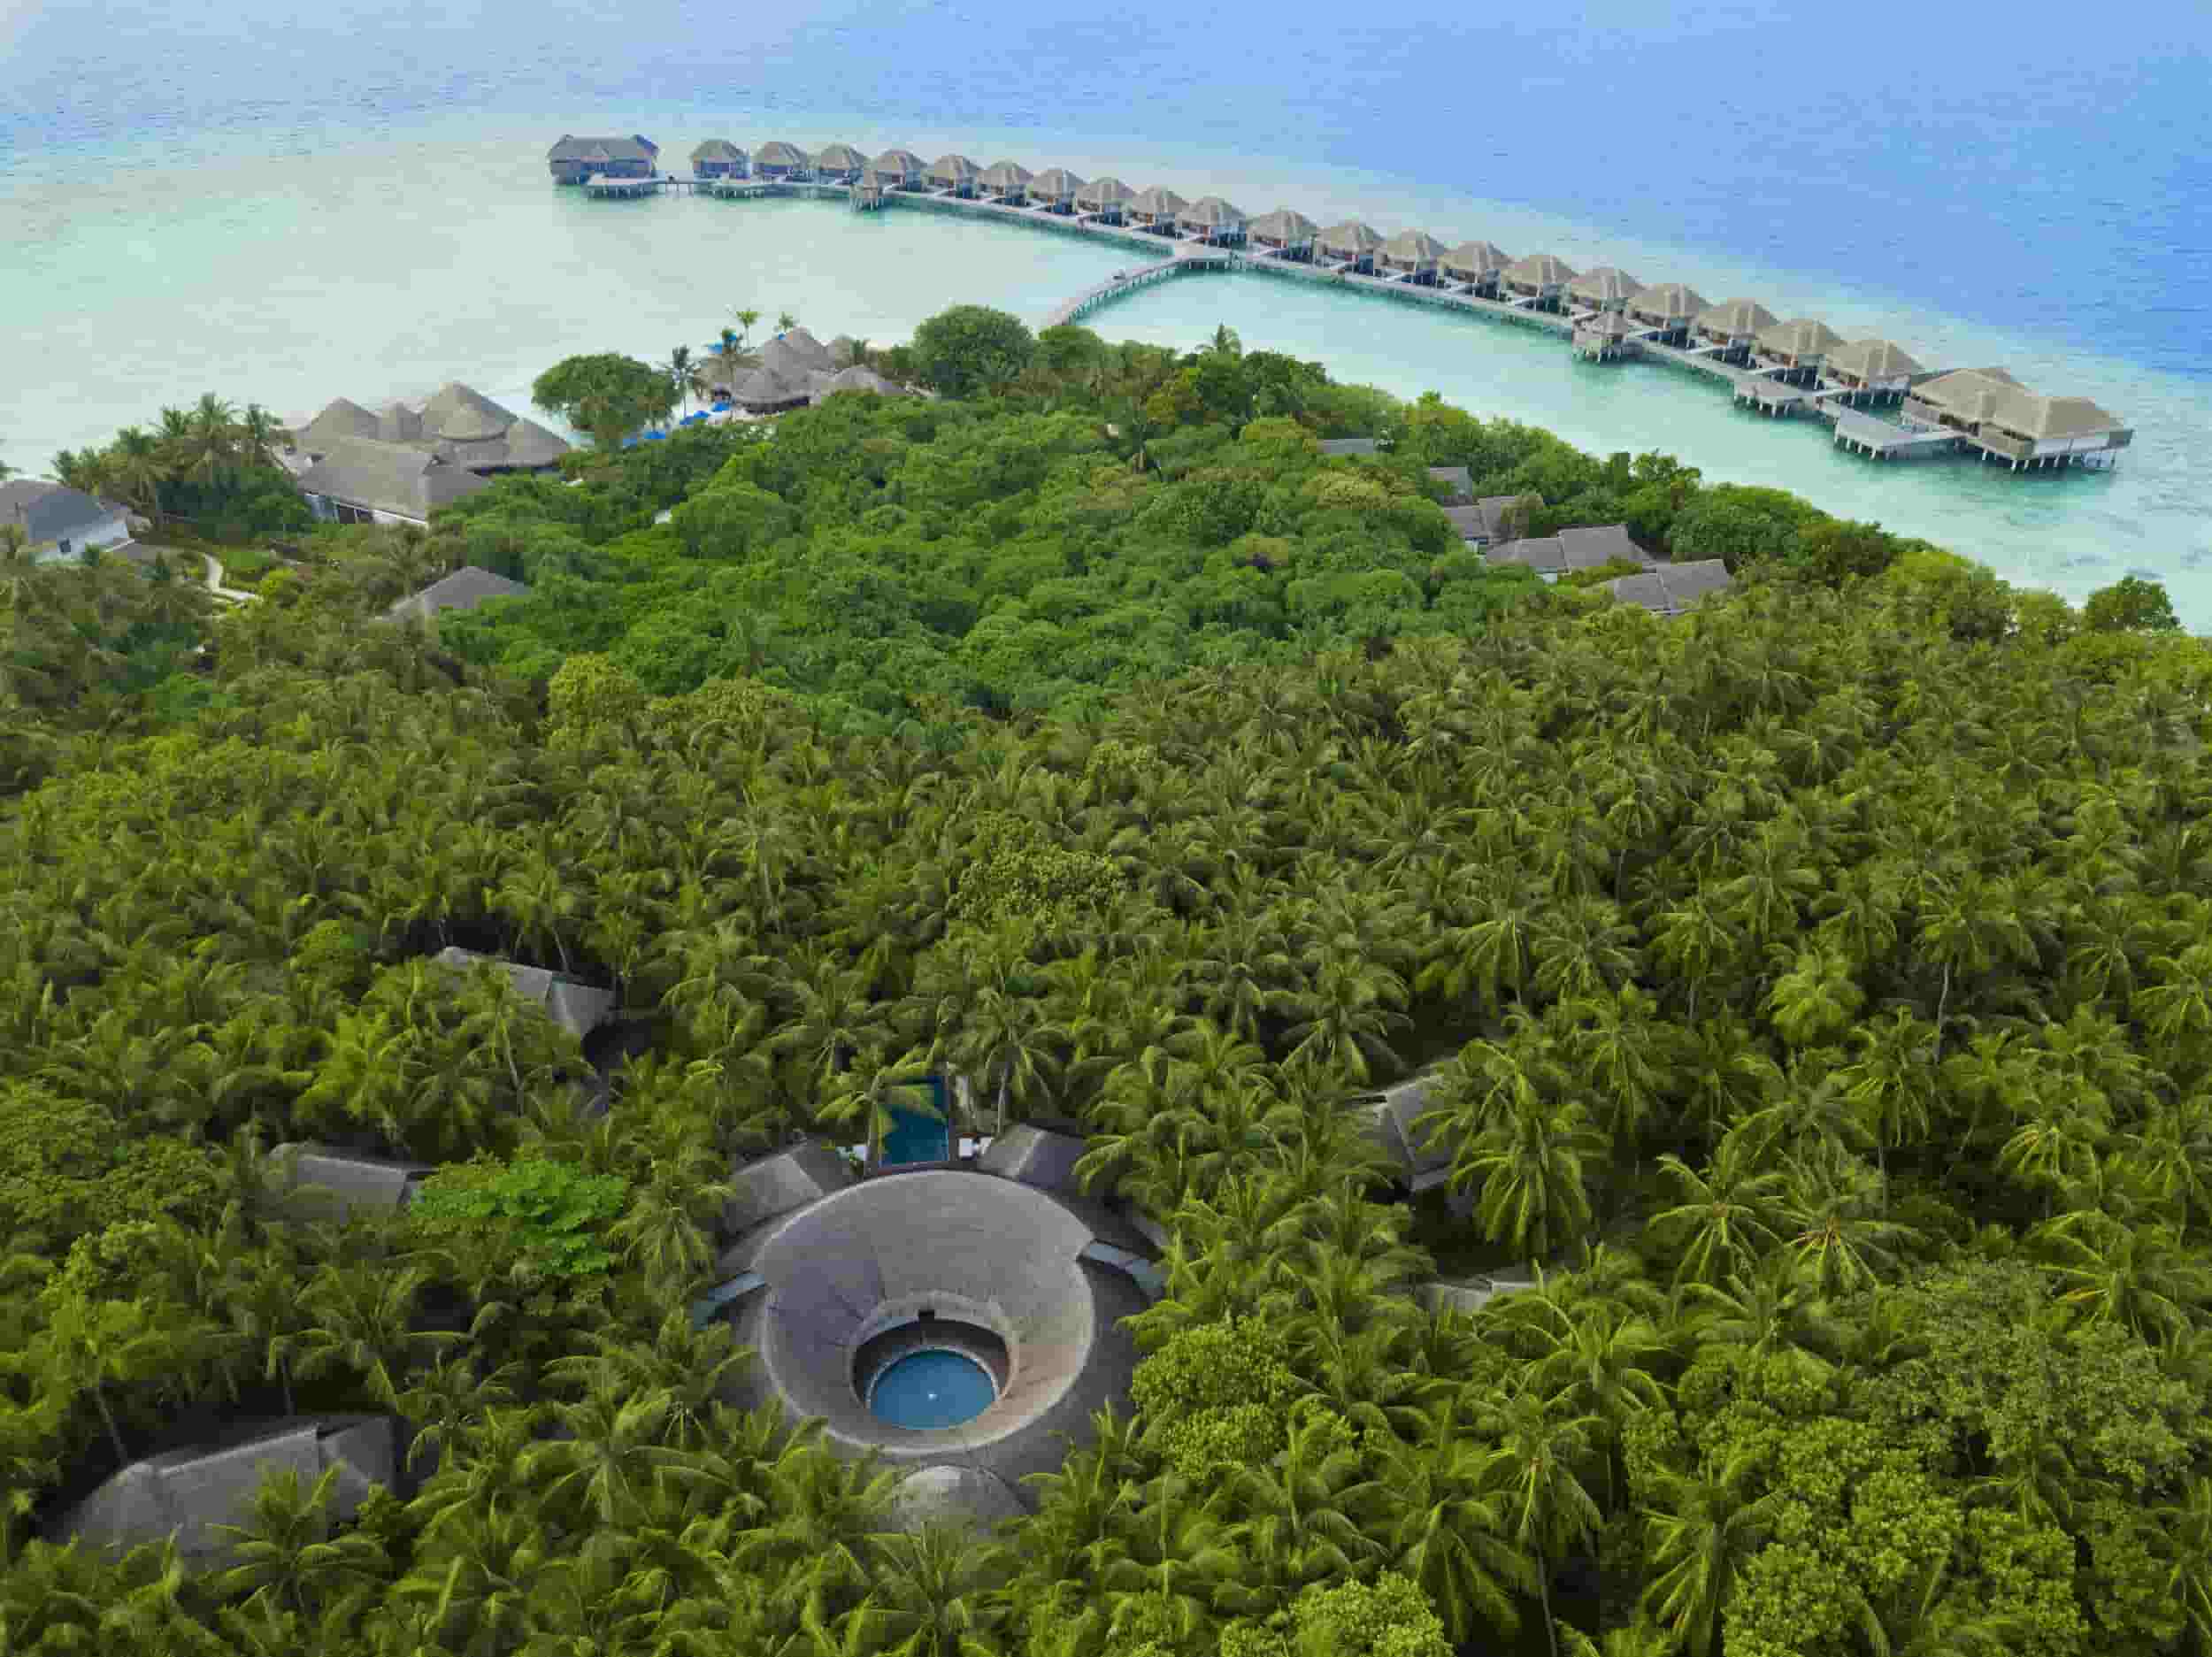 drone image of Dusit International property in maldives. With lush green and over water villas above the turquoise waters